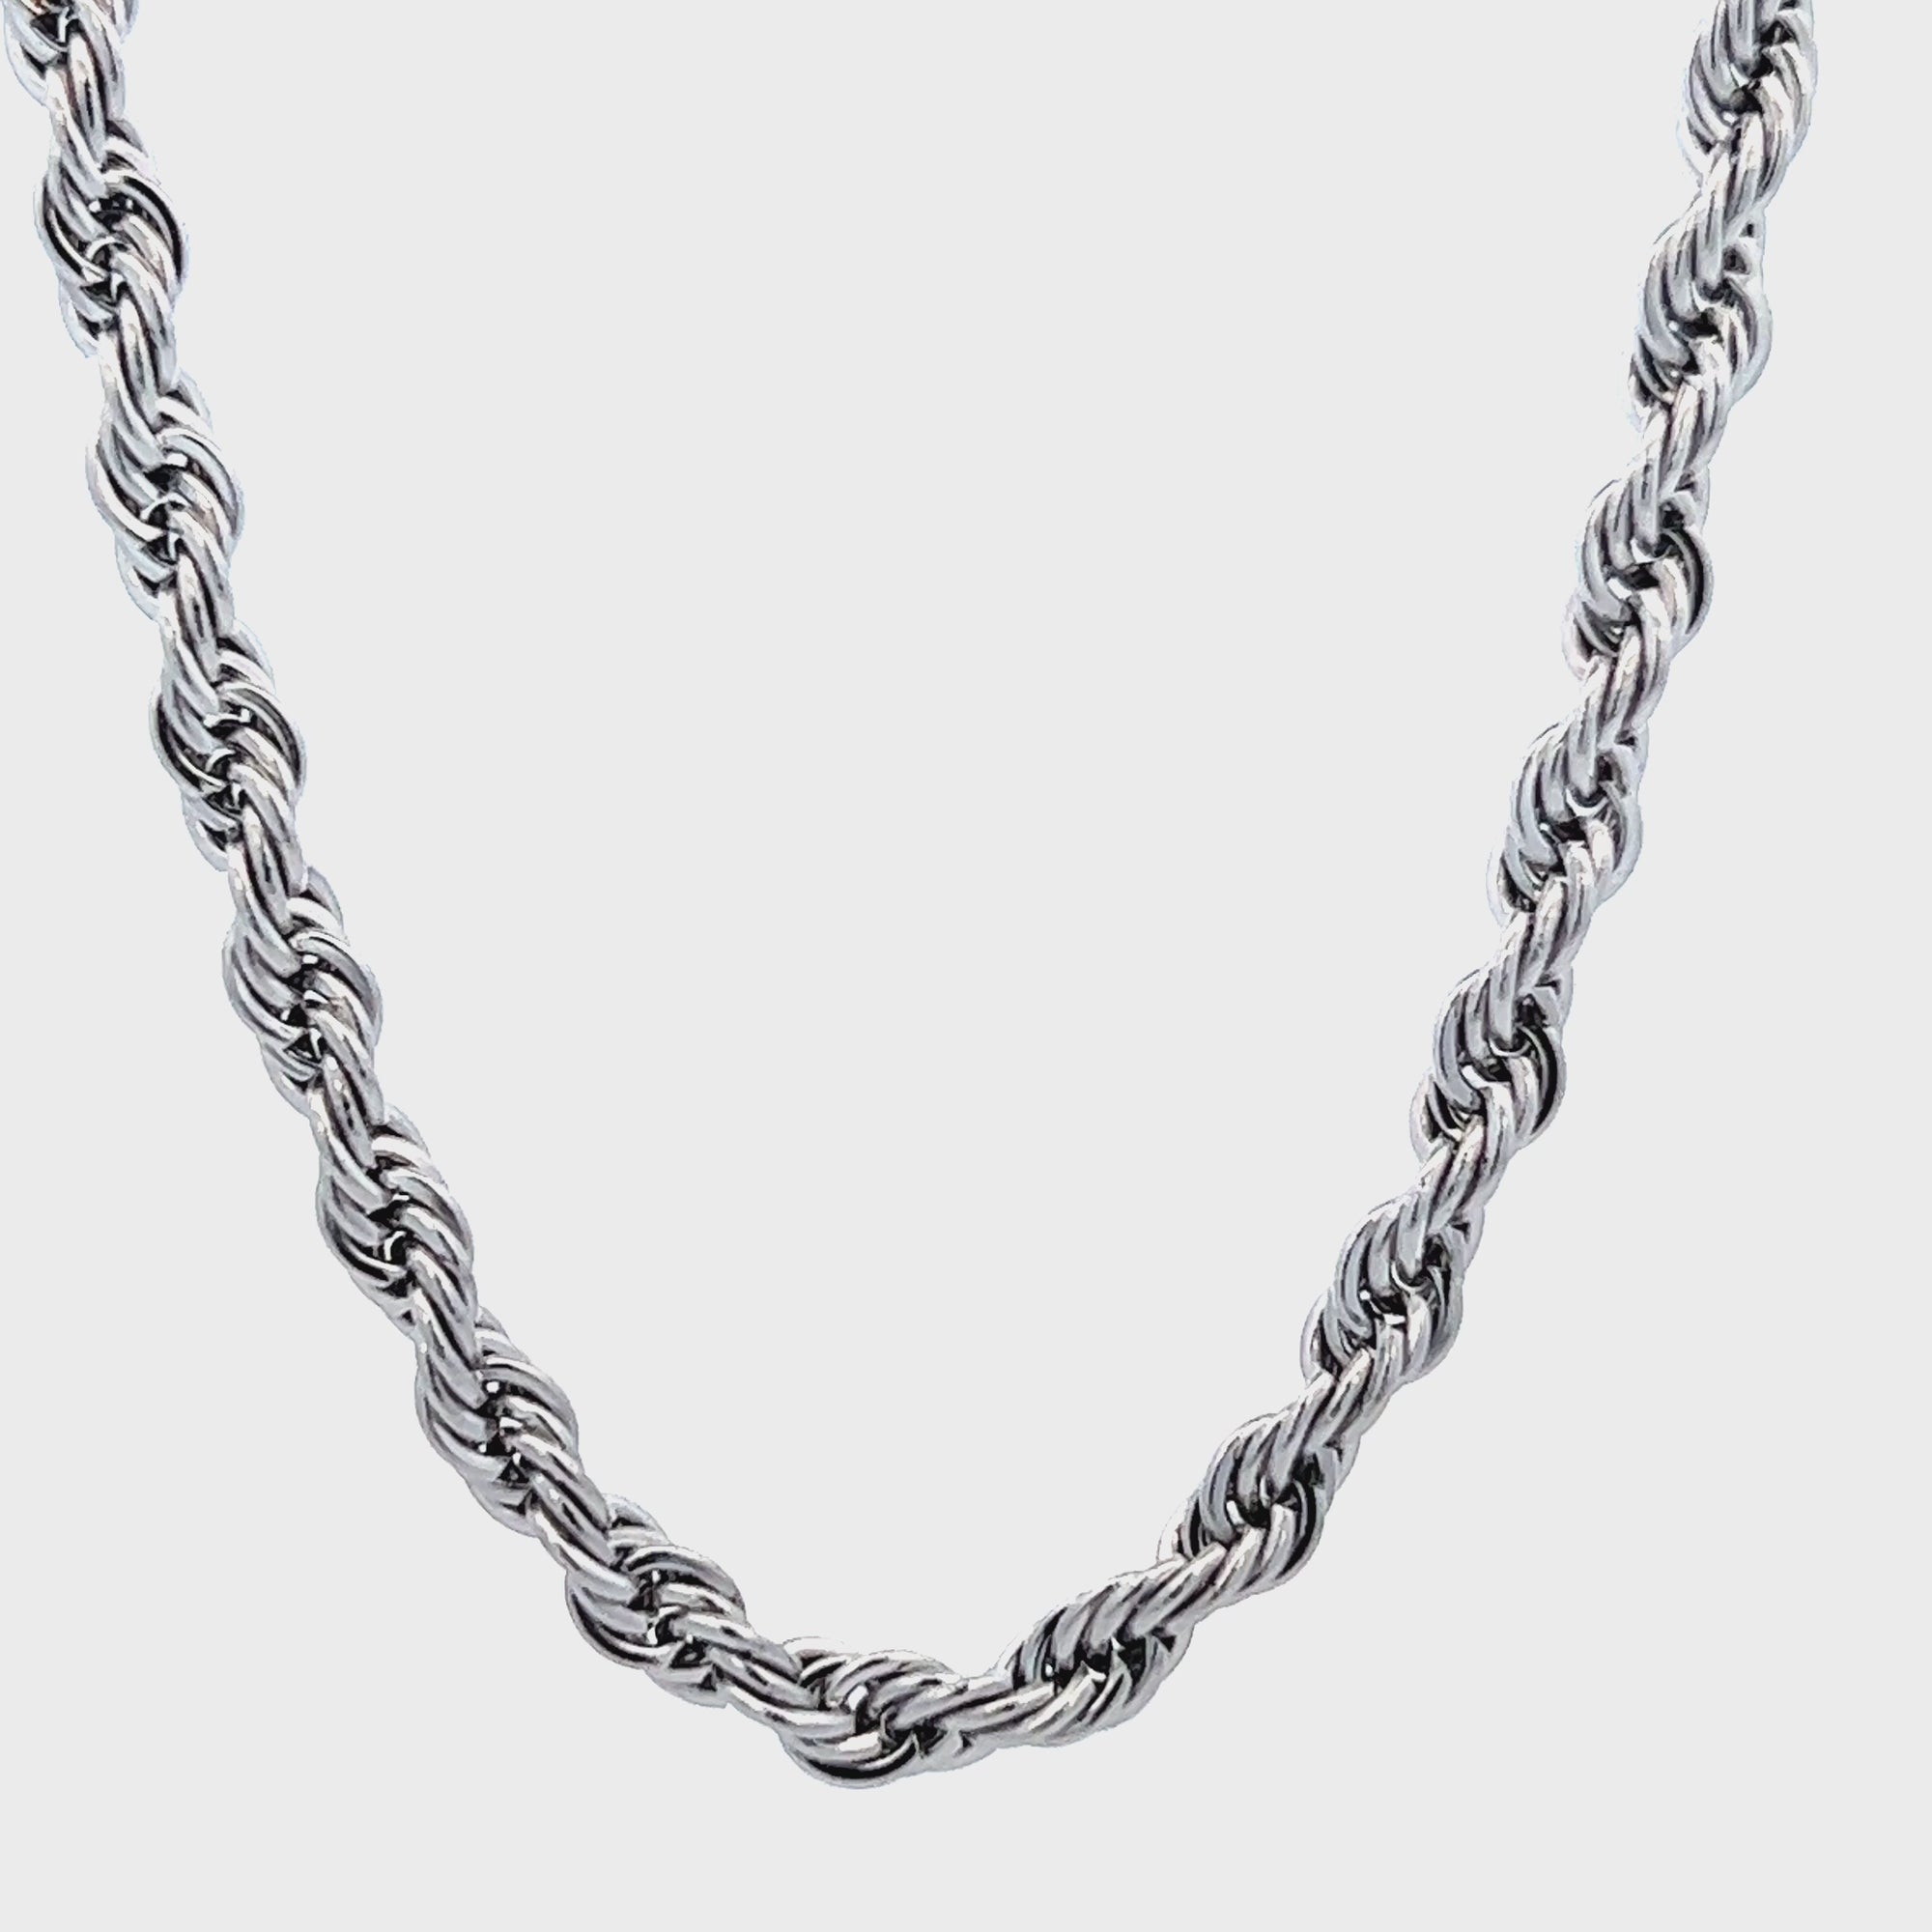 Silver Tone Stainless Steel 5mm French Rope Chain